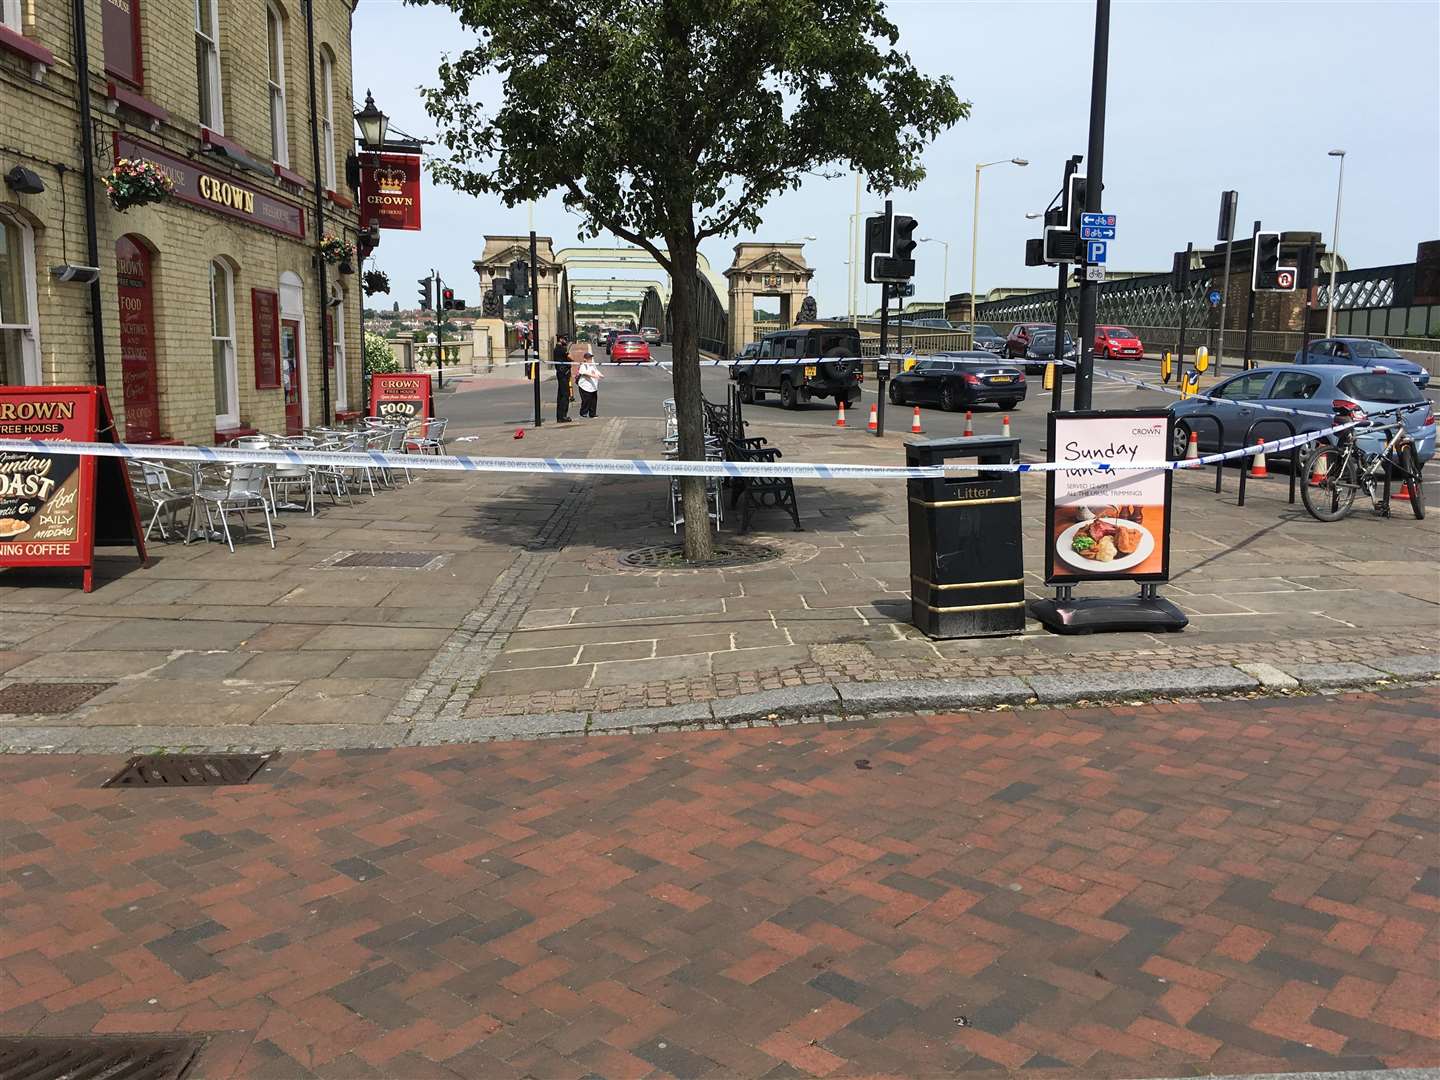 The area outside The Crown pub in Rochester was sealed off after the incident.